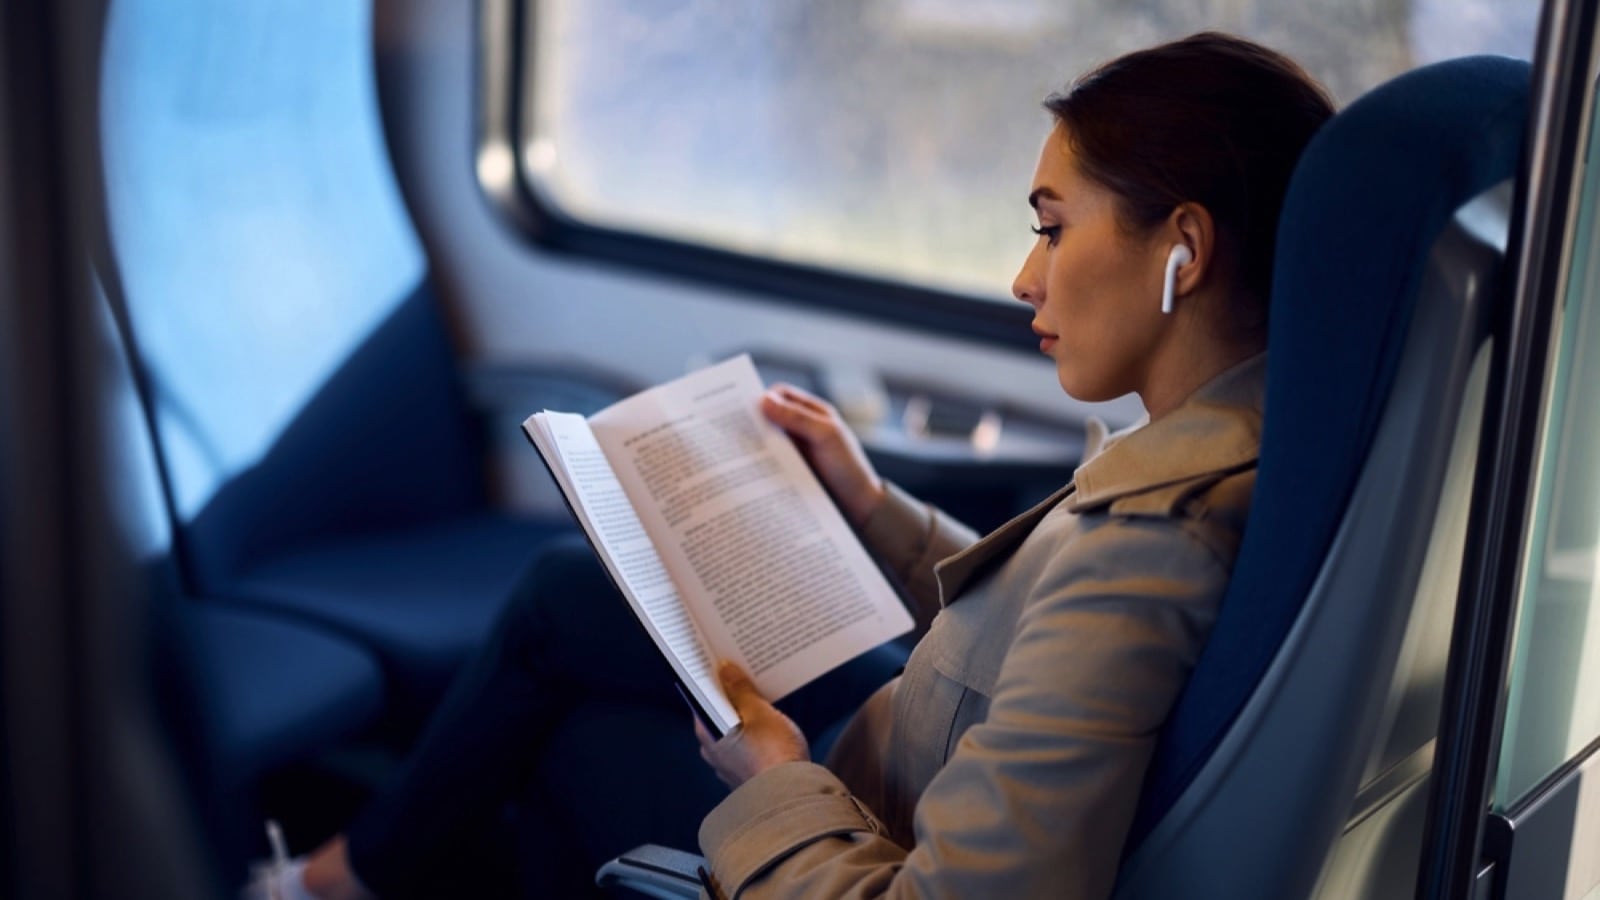 Woman traveling in train reading book